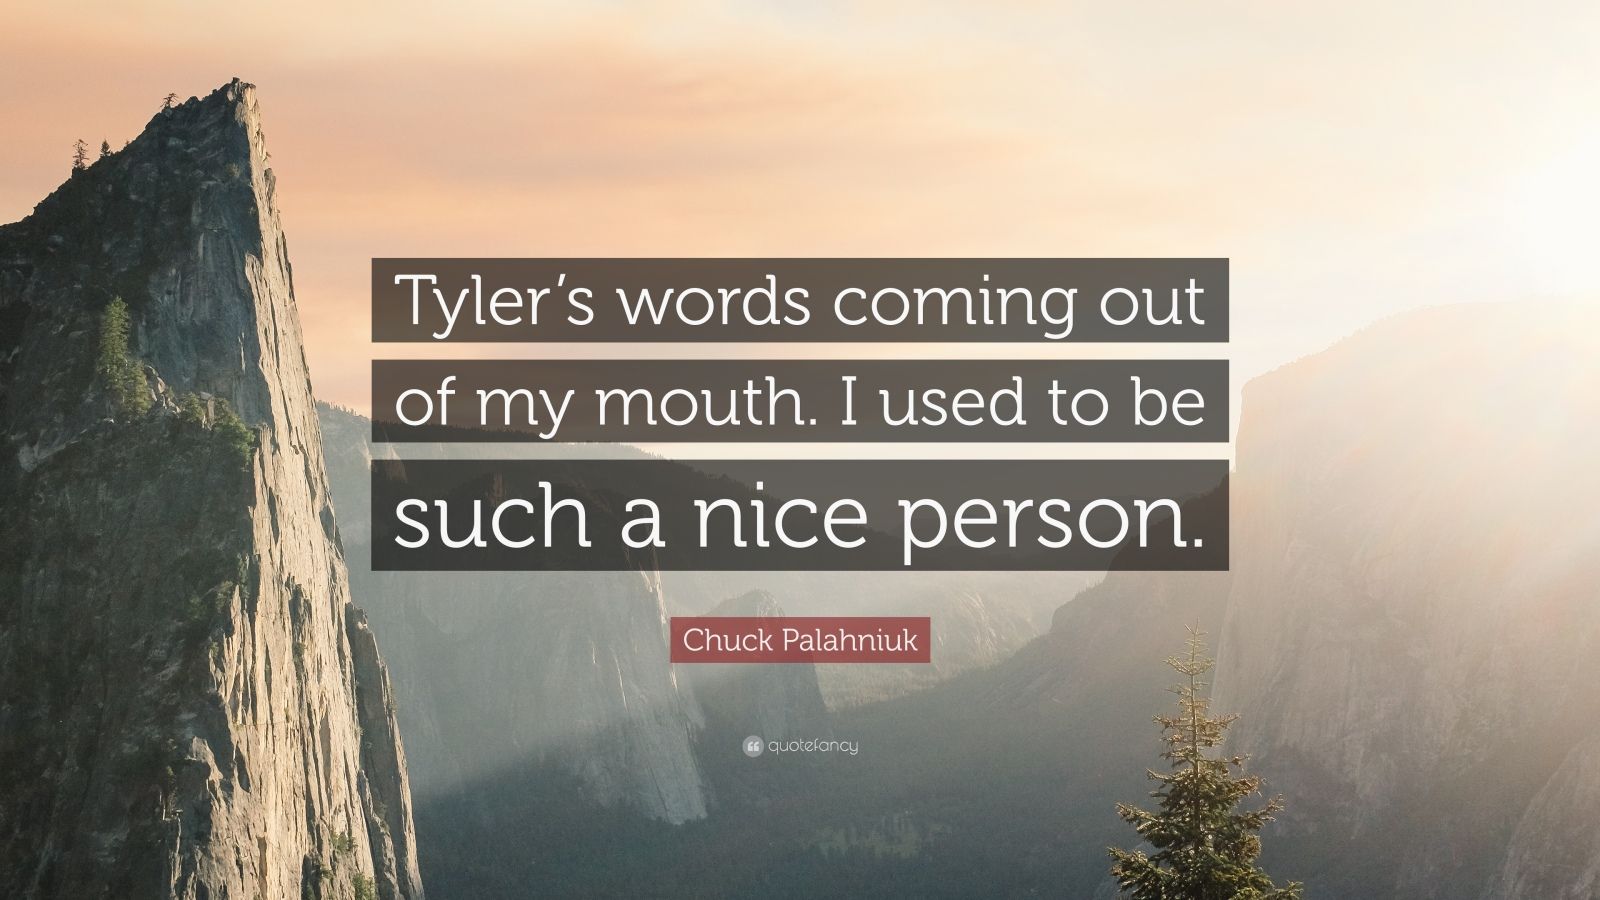 https://quotefancy.com/media/wallpaper/1600x900/72005-Chuck-Palahniuk-Quote-Tyler-s-words-coming-out-of-my-mouth-I-used.jpg